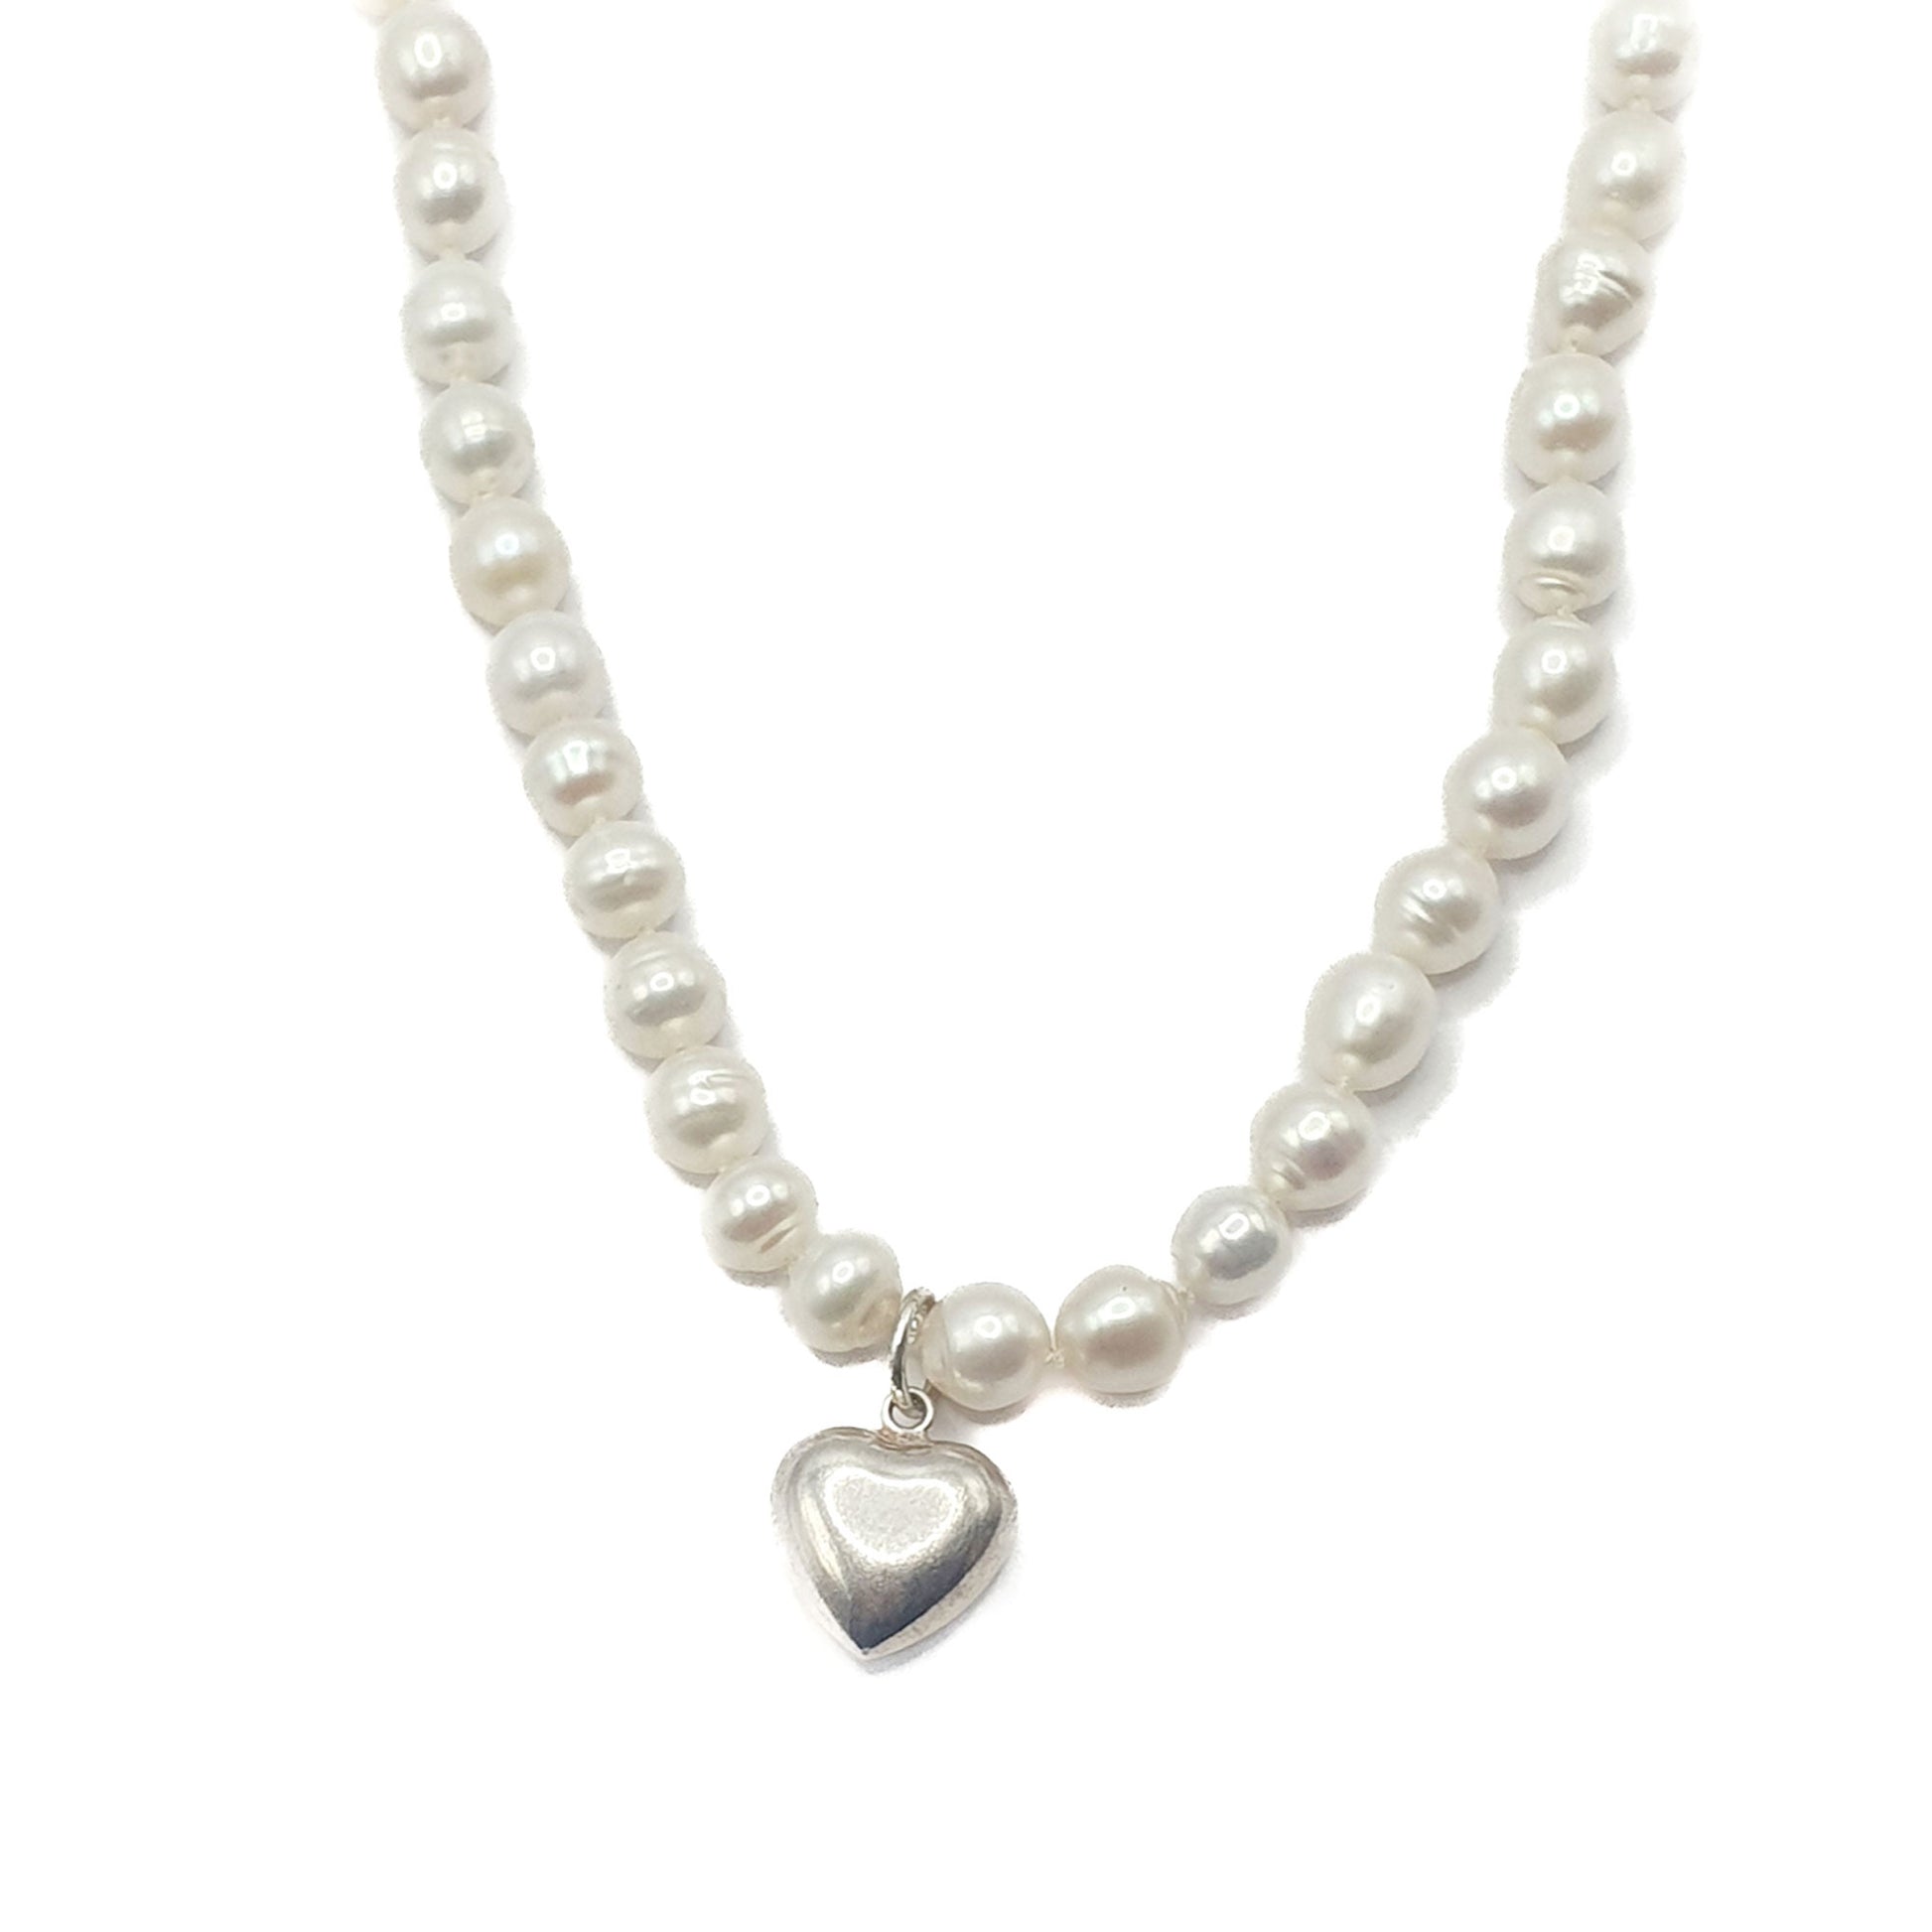 Delicate freshwater pearl necklace in white with a sterling silver puff heart